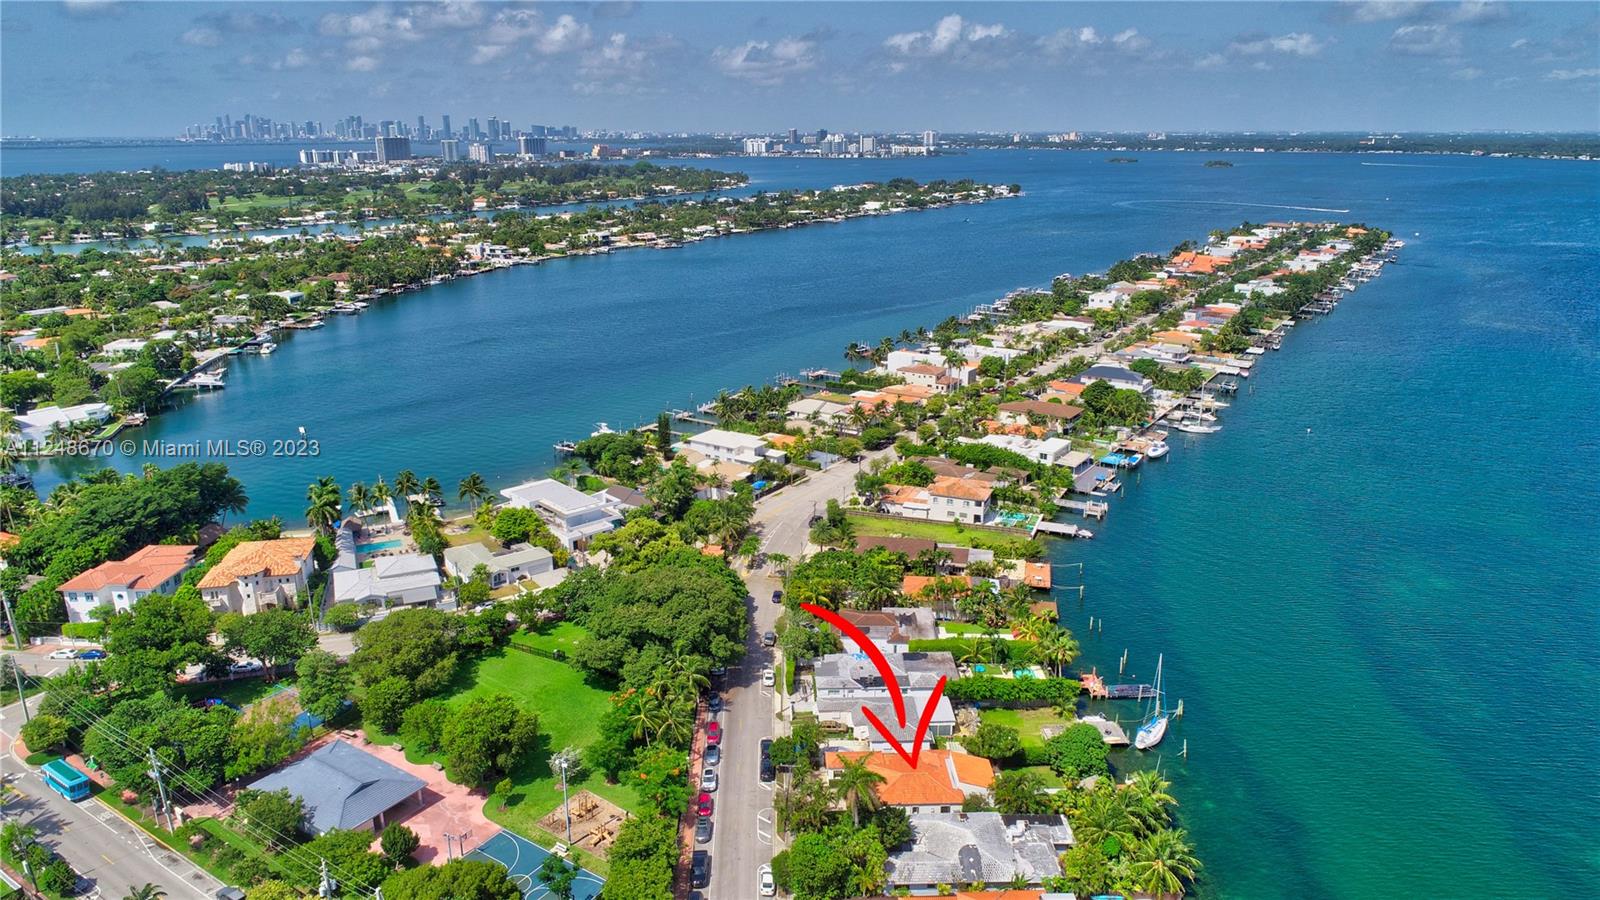 Nestled atop one of the most sought-after neighborhoods in Miami Beach, 925 Stillwater Drive offers truly unforgettable sunset experience. As the sun dips below the horizon, rays dance across waters of Indian Creek Island, painting the sky in a stunning array of oranges & pinks. But the views don't stop there - this property is located in a safe & quiet neighborhood, allowing you to fully relax and unwind in peaceful surroundings. From the backyard, you can watch dolphins play in the crystal-clear waters of the lagoon-like bayfront, or even take a dip yourself. And with its central location, commuting to either Aventura or Downtown Miami is a breeze. This property is a true oasis of serenity, nature, and beauty - a must-see for anyone seeking a slice of paradise in the heart of Miami Beach